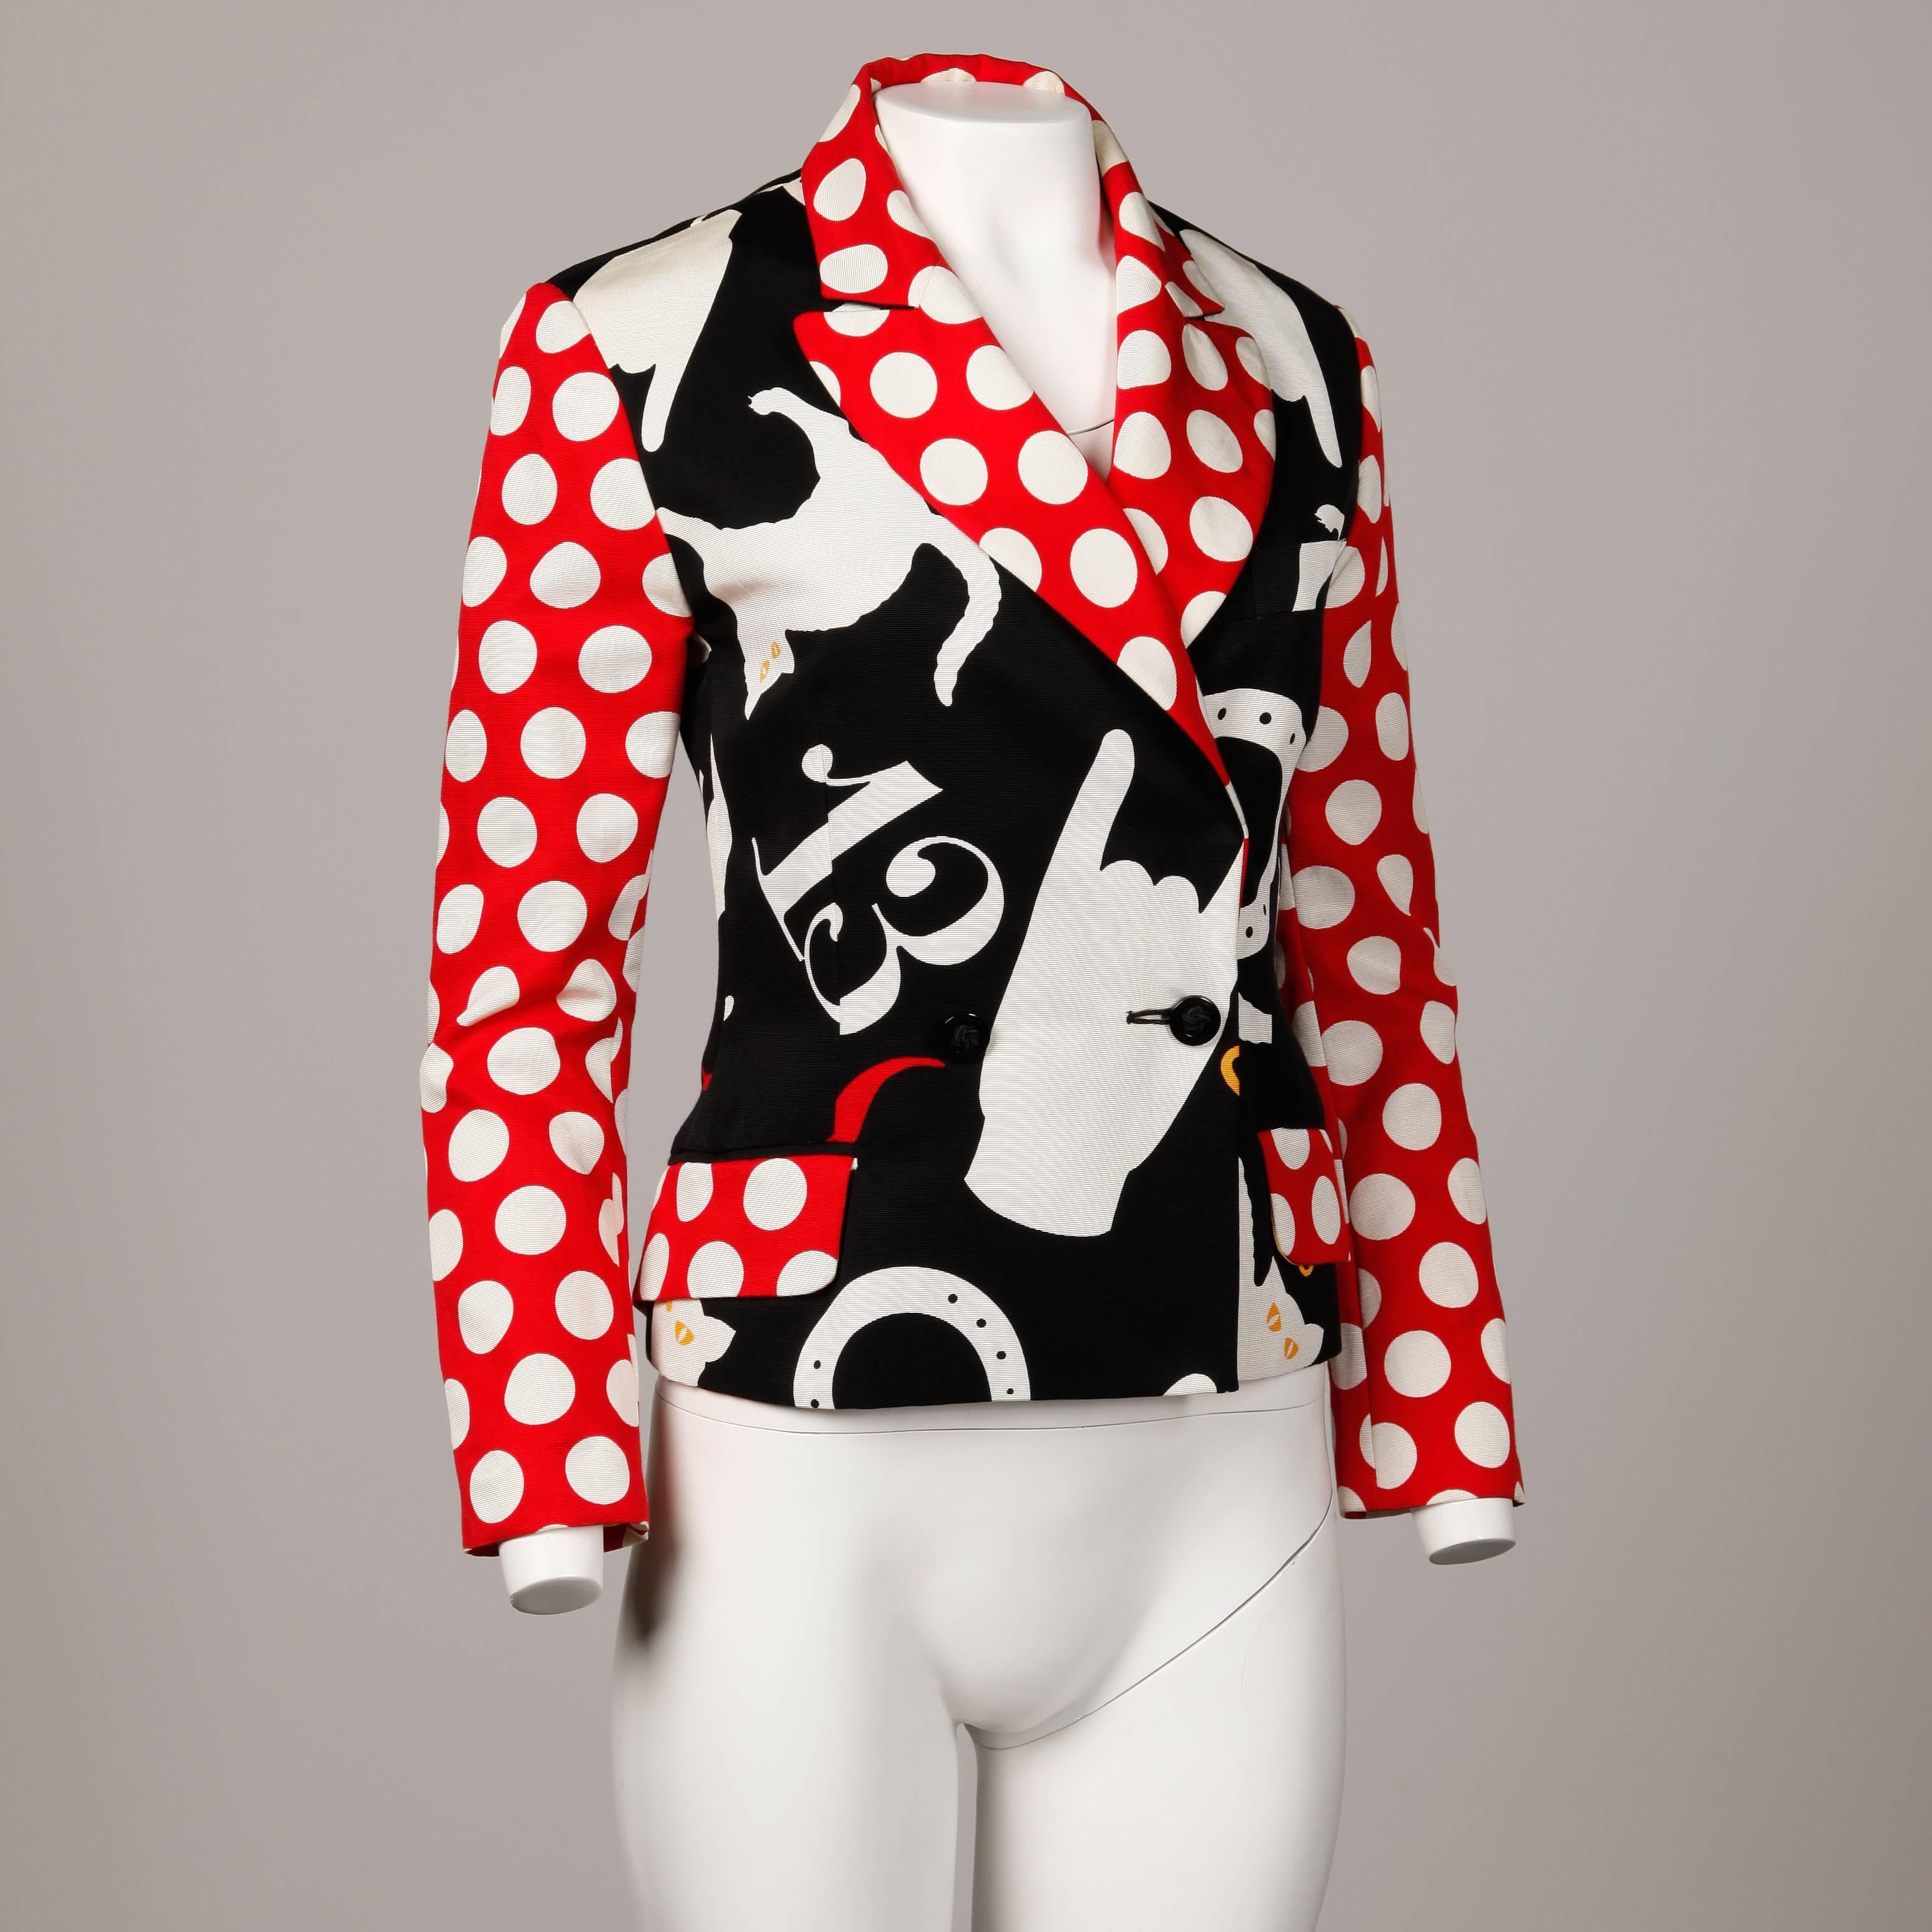 Iconic vintage Moschino blazer jacket with a "luck" themed pop art print featuring the number 13, horseshoes and a cat. Front button closure and front pockets still sewn shut. 68% Cotton, 32% Rayon fabric. Fully lined. The marked size is I